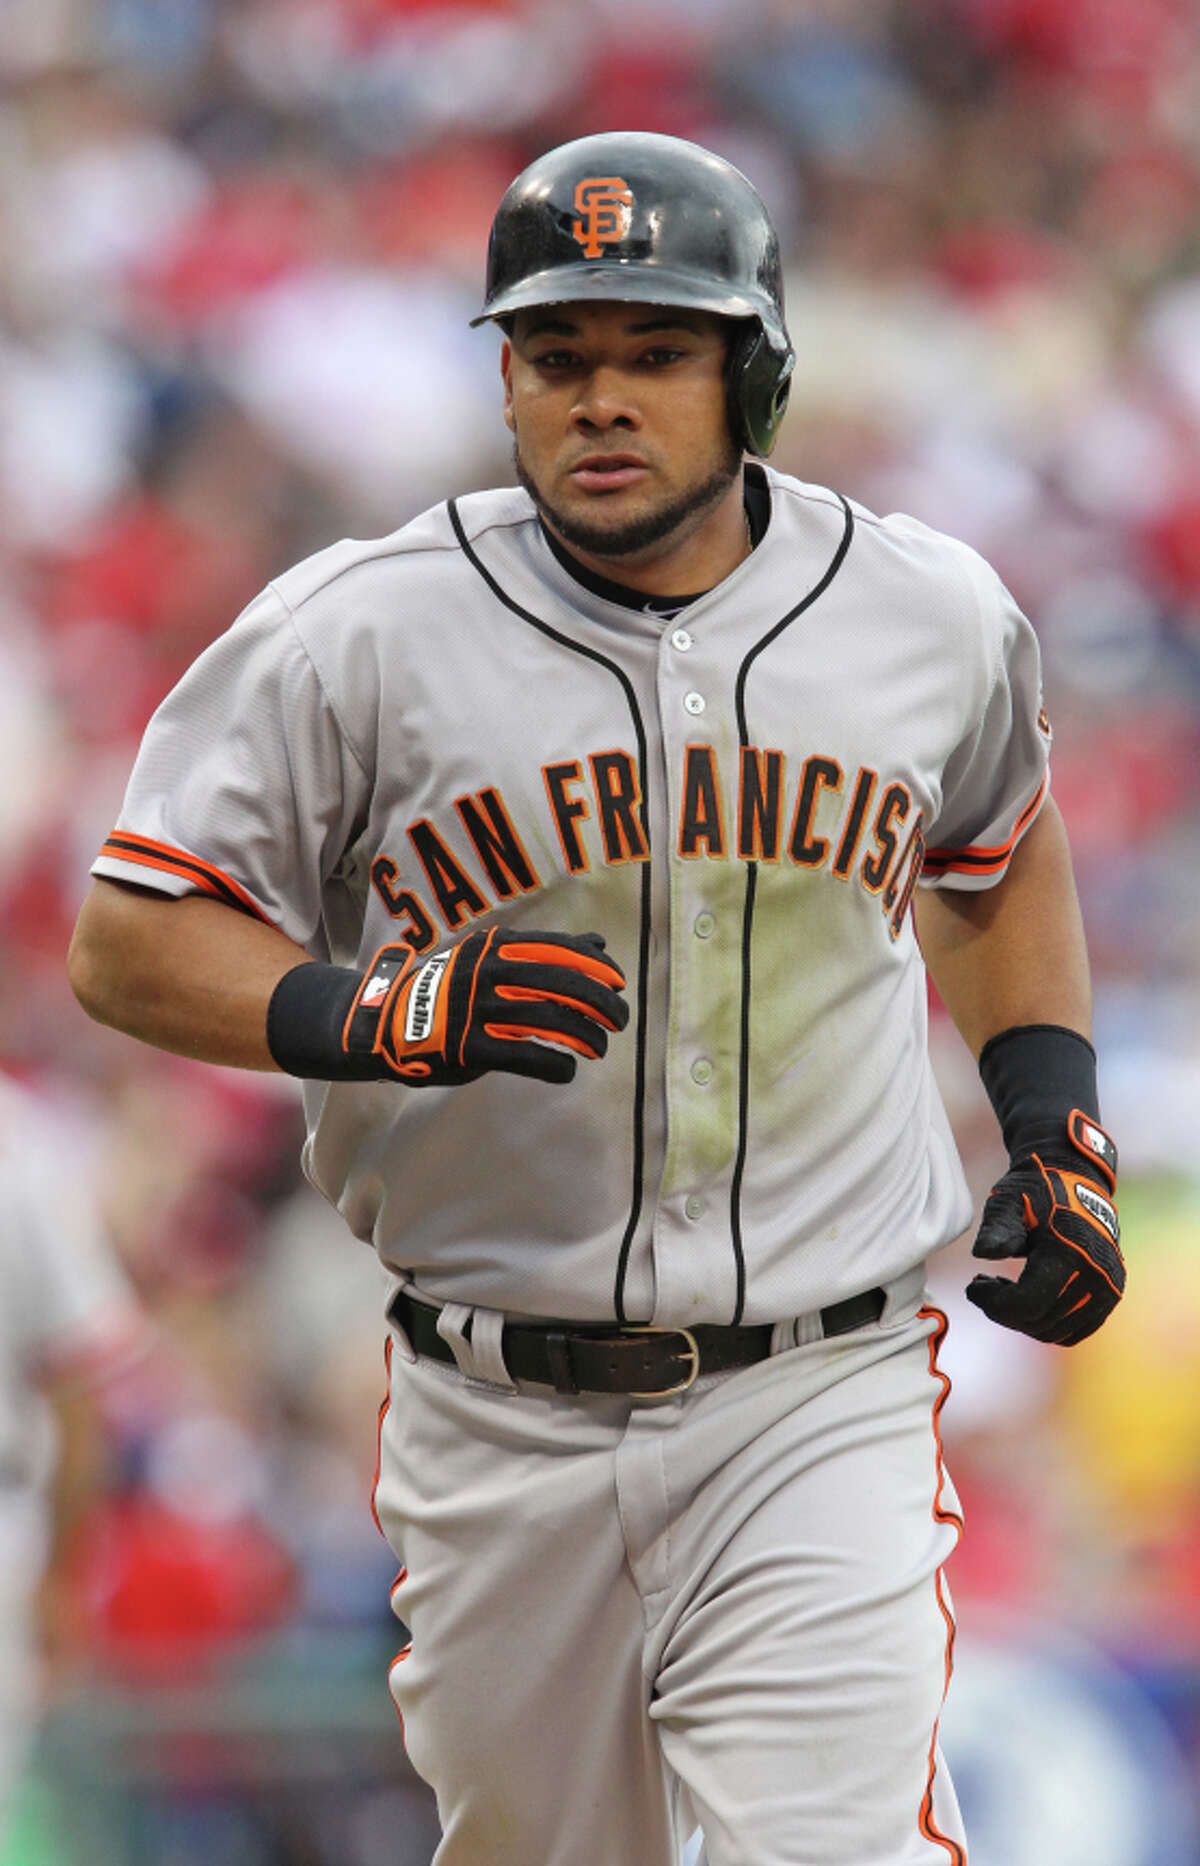 Outfielder Melky Cabrera, who played for the Giants in 2012, received a 50-game suspenion that year for a violation of Major League Baseball’s drug policy.